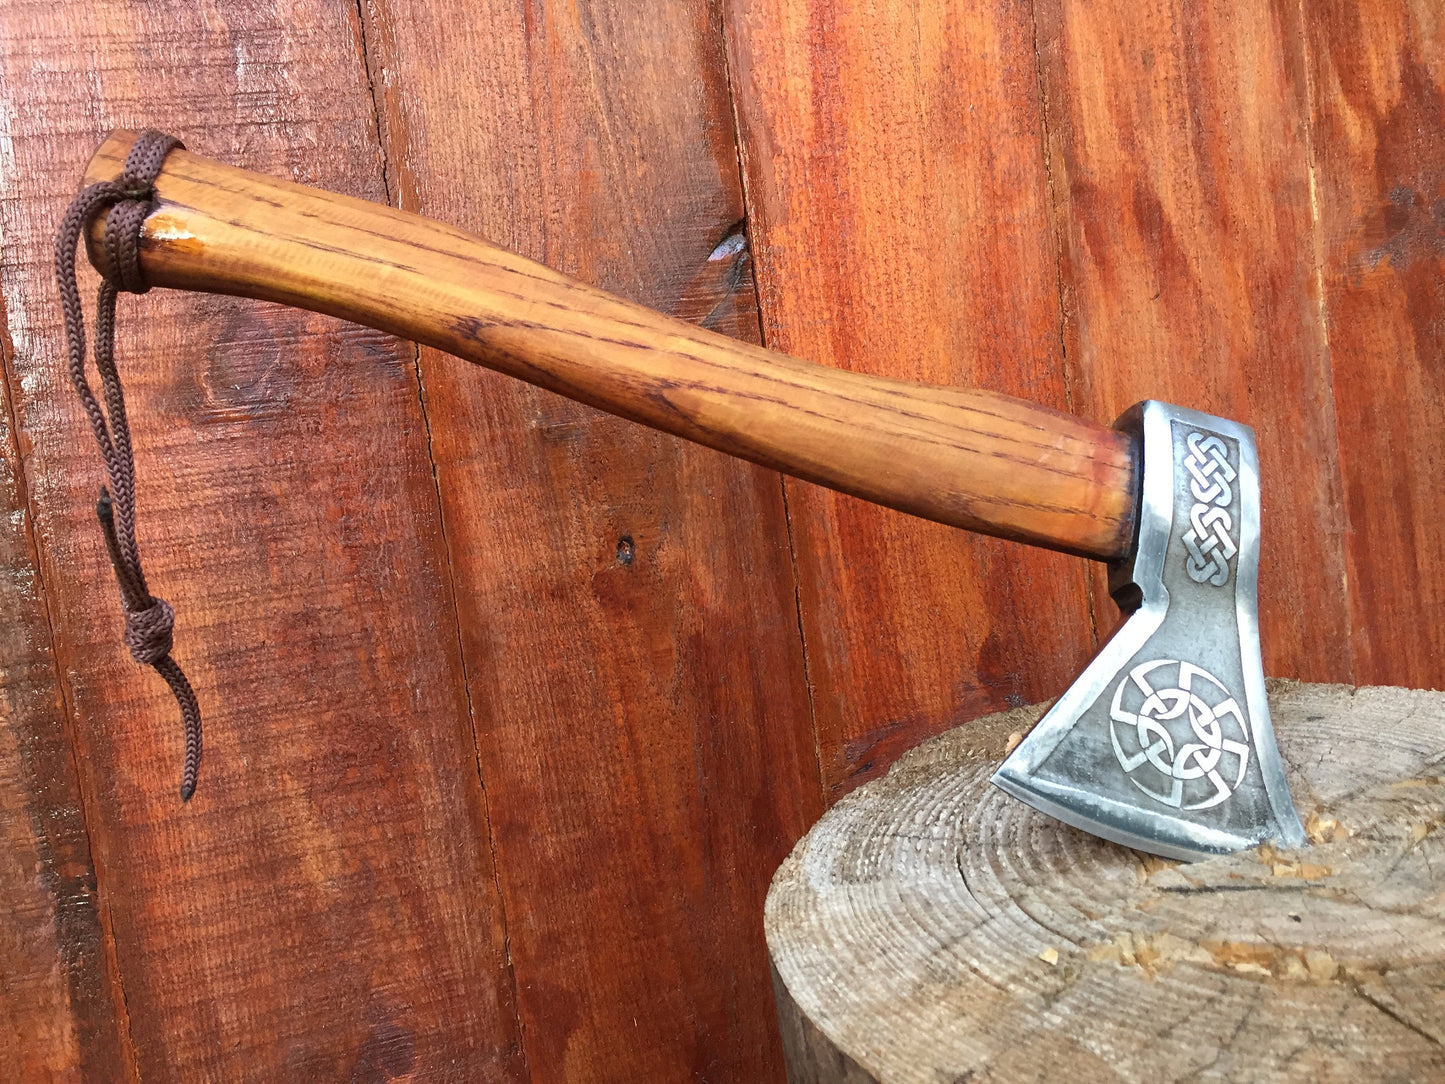 Mens gifts, viking axe, leviathan axe, tomahawk, handyman tool, axe, steel decor, steel gifts for men - 11th anniversary, iron gifts, steel